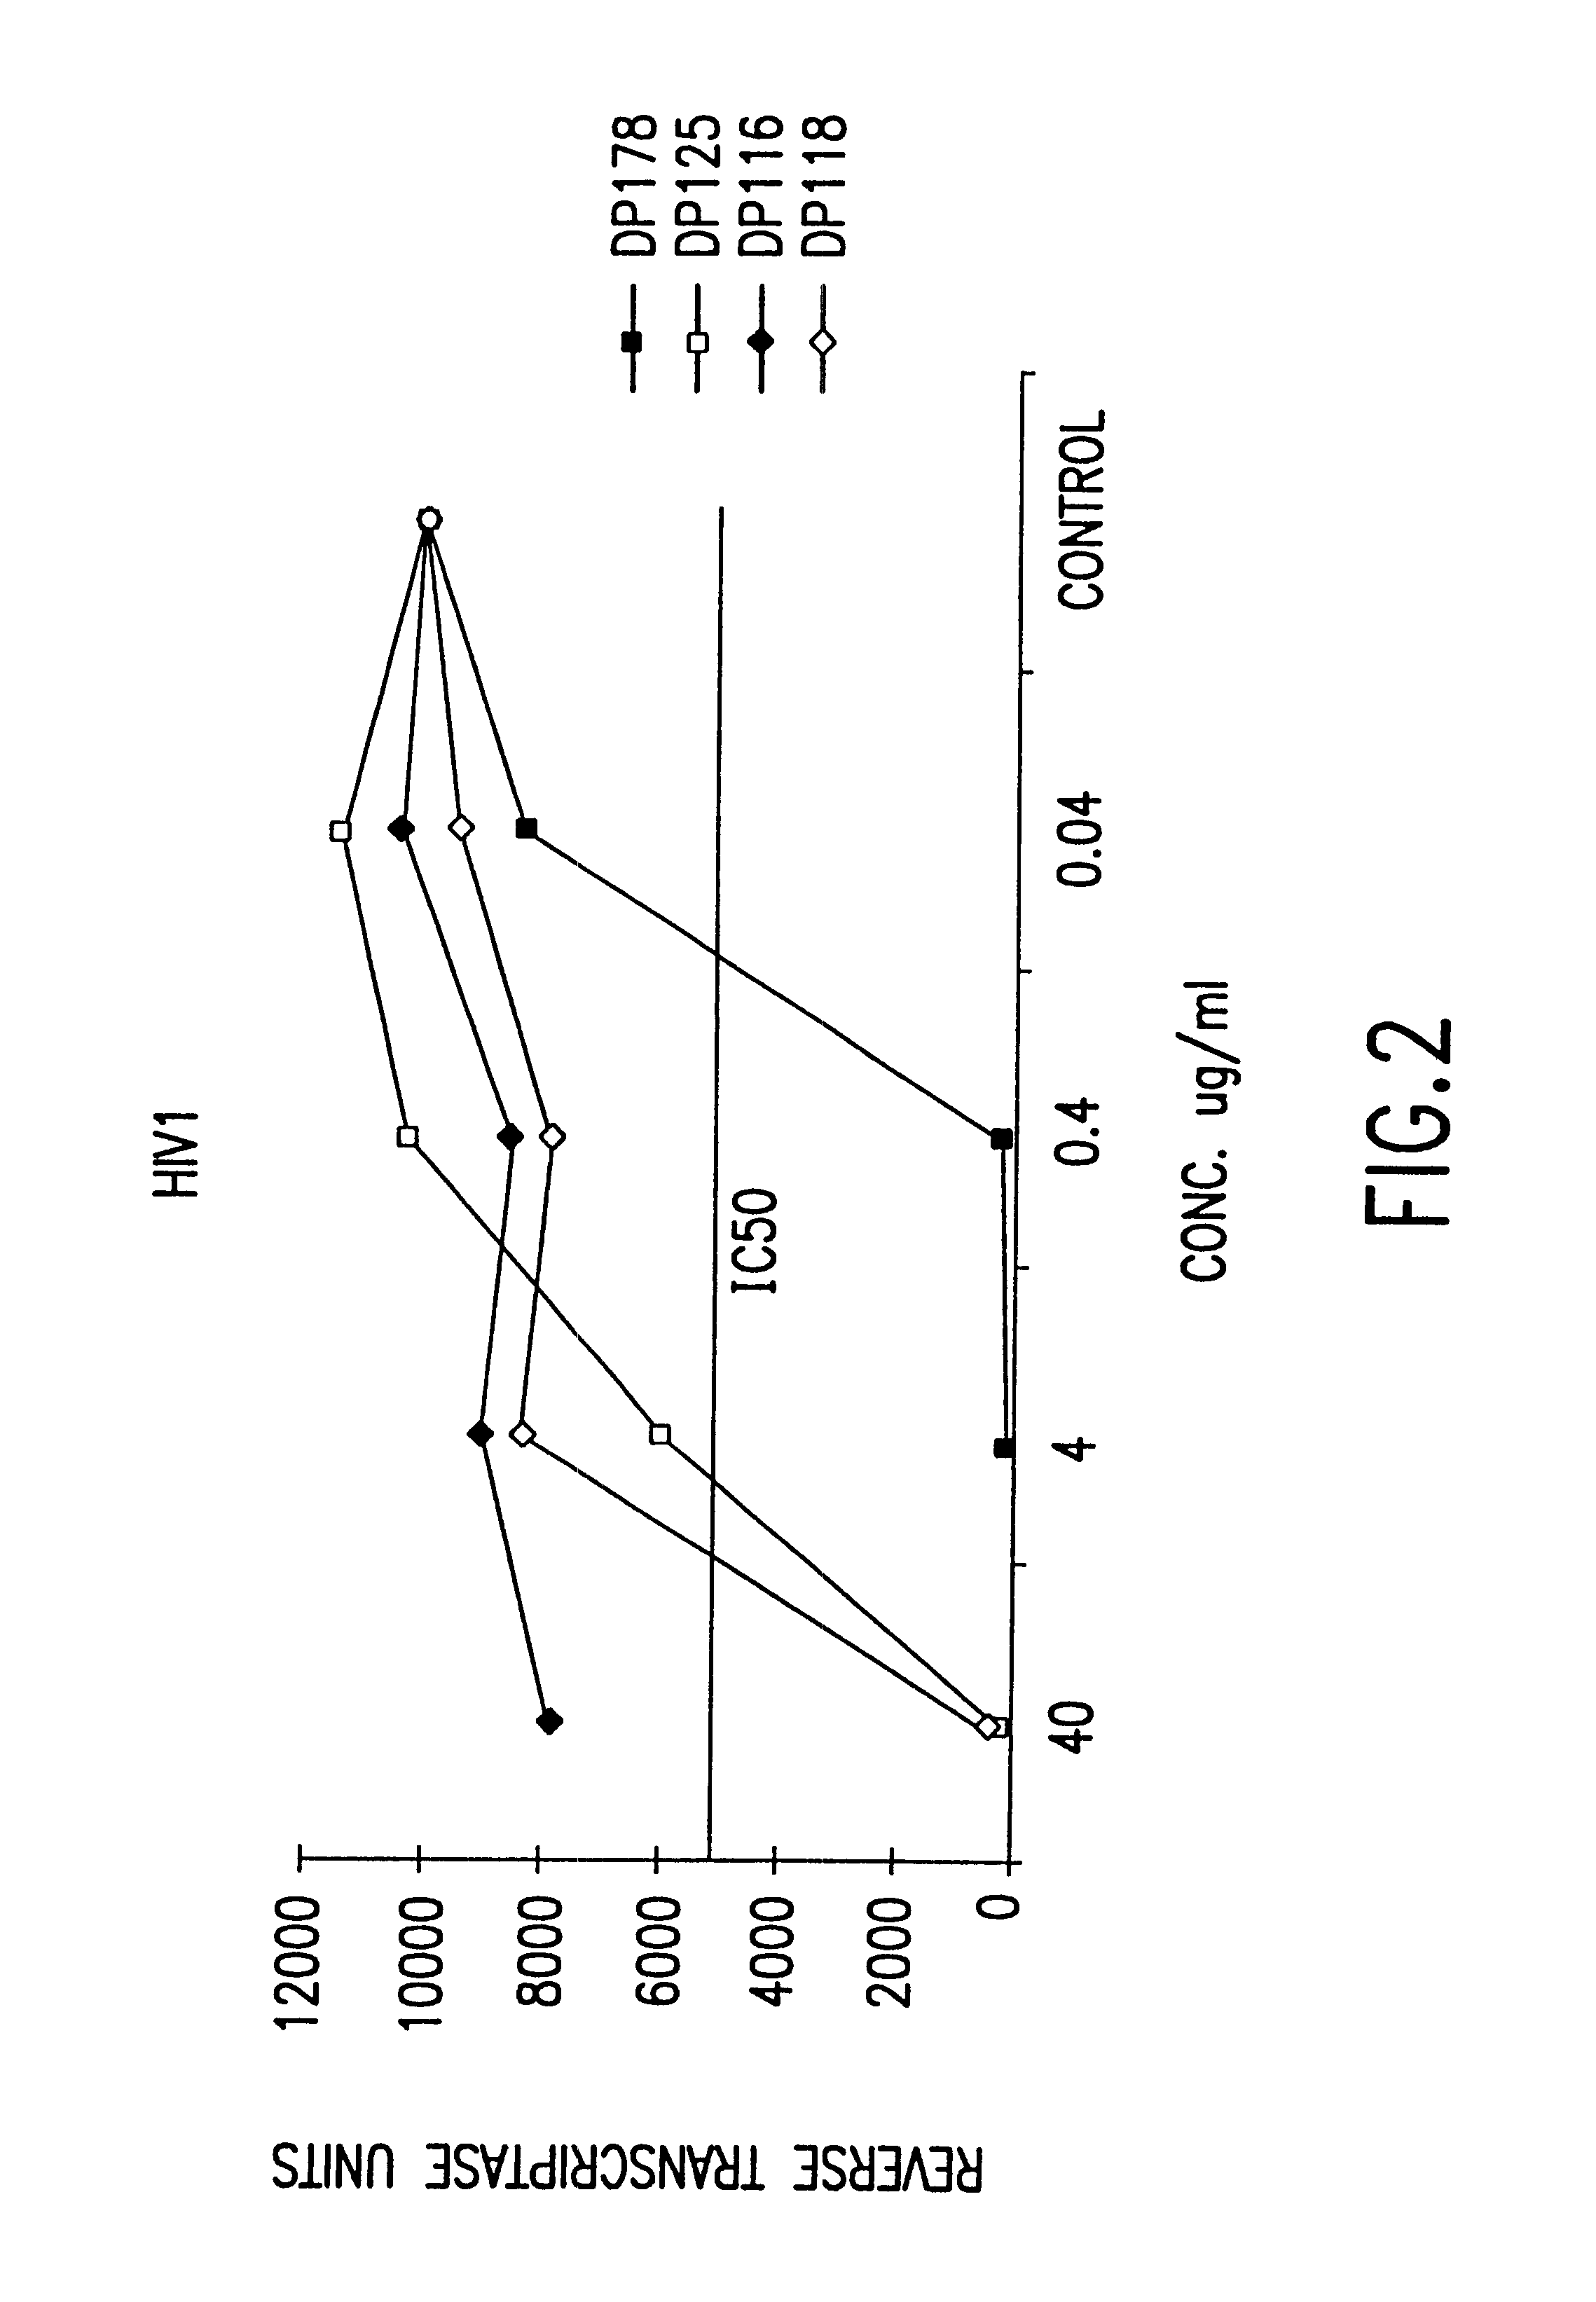 Methods for the inhibition of respiratory syncytial virus transmission